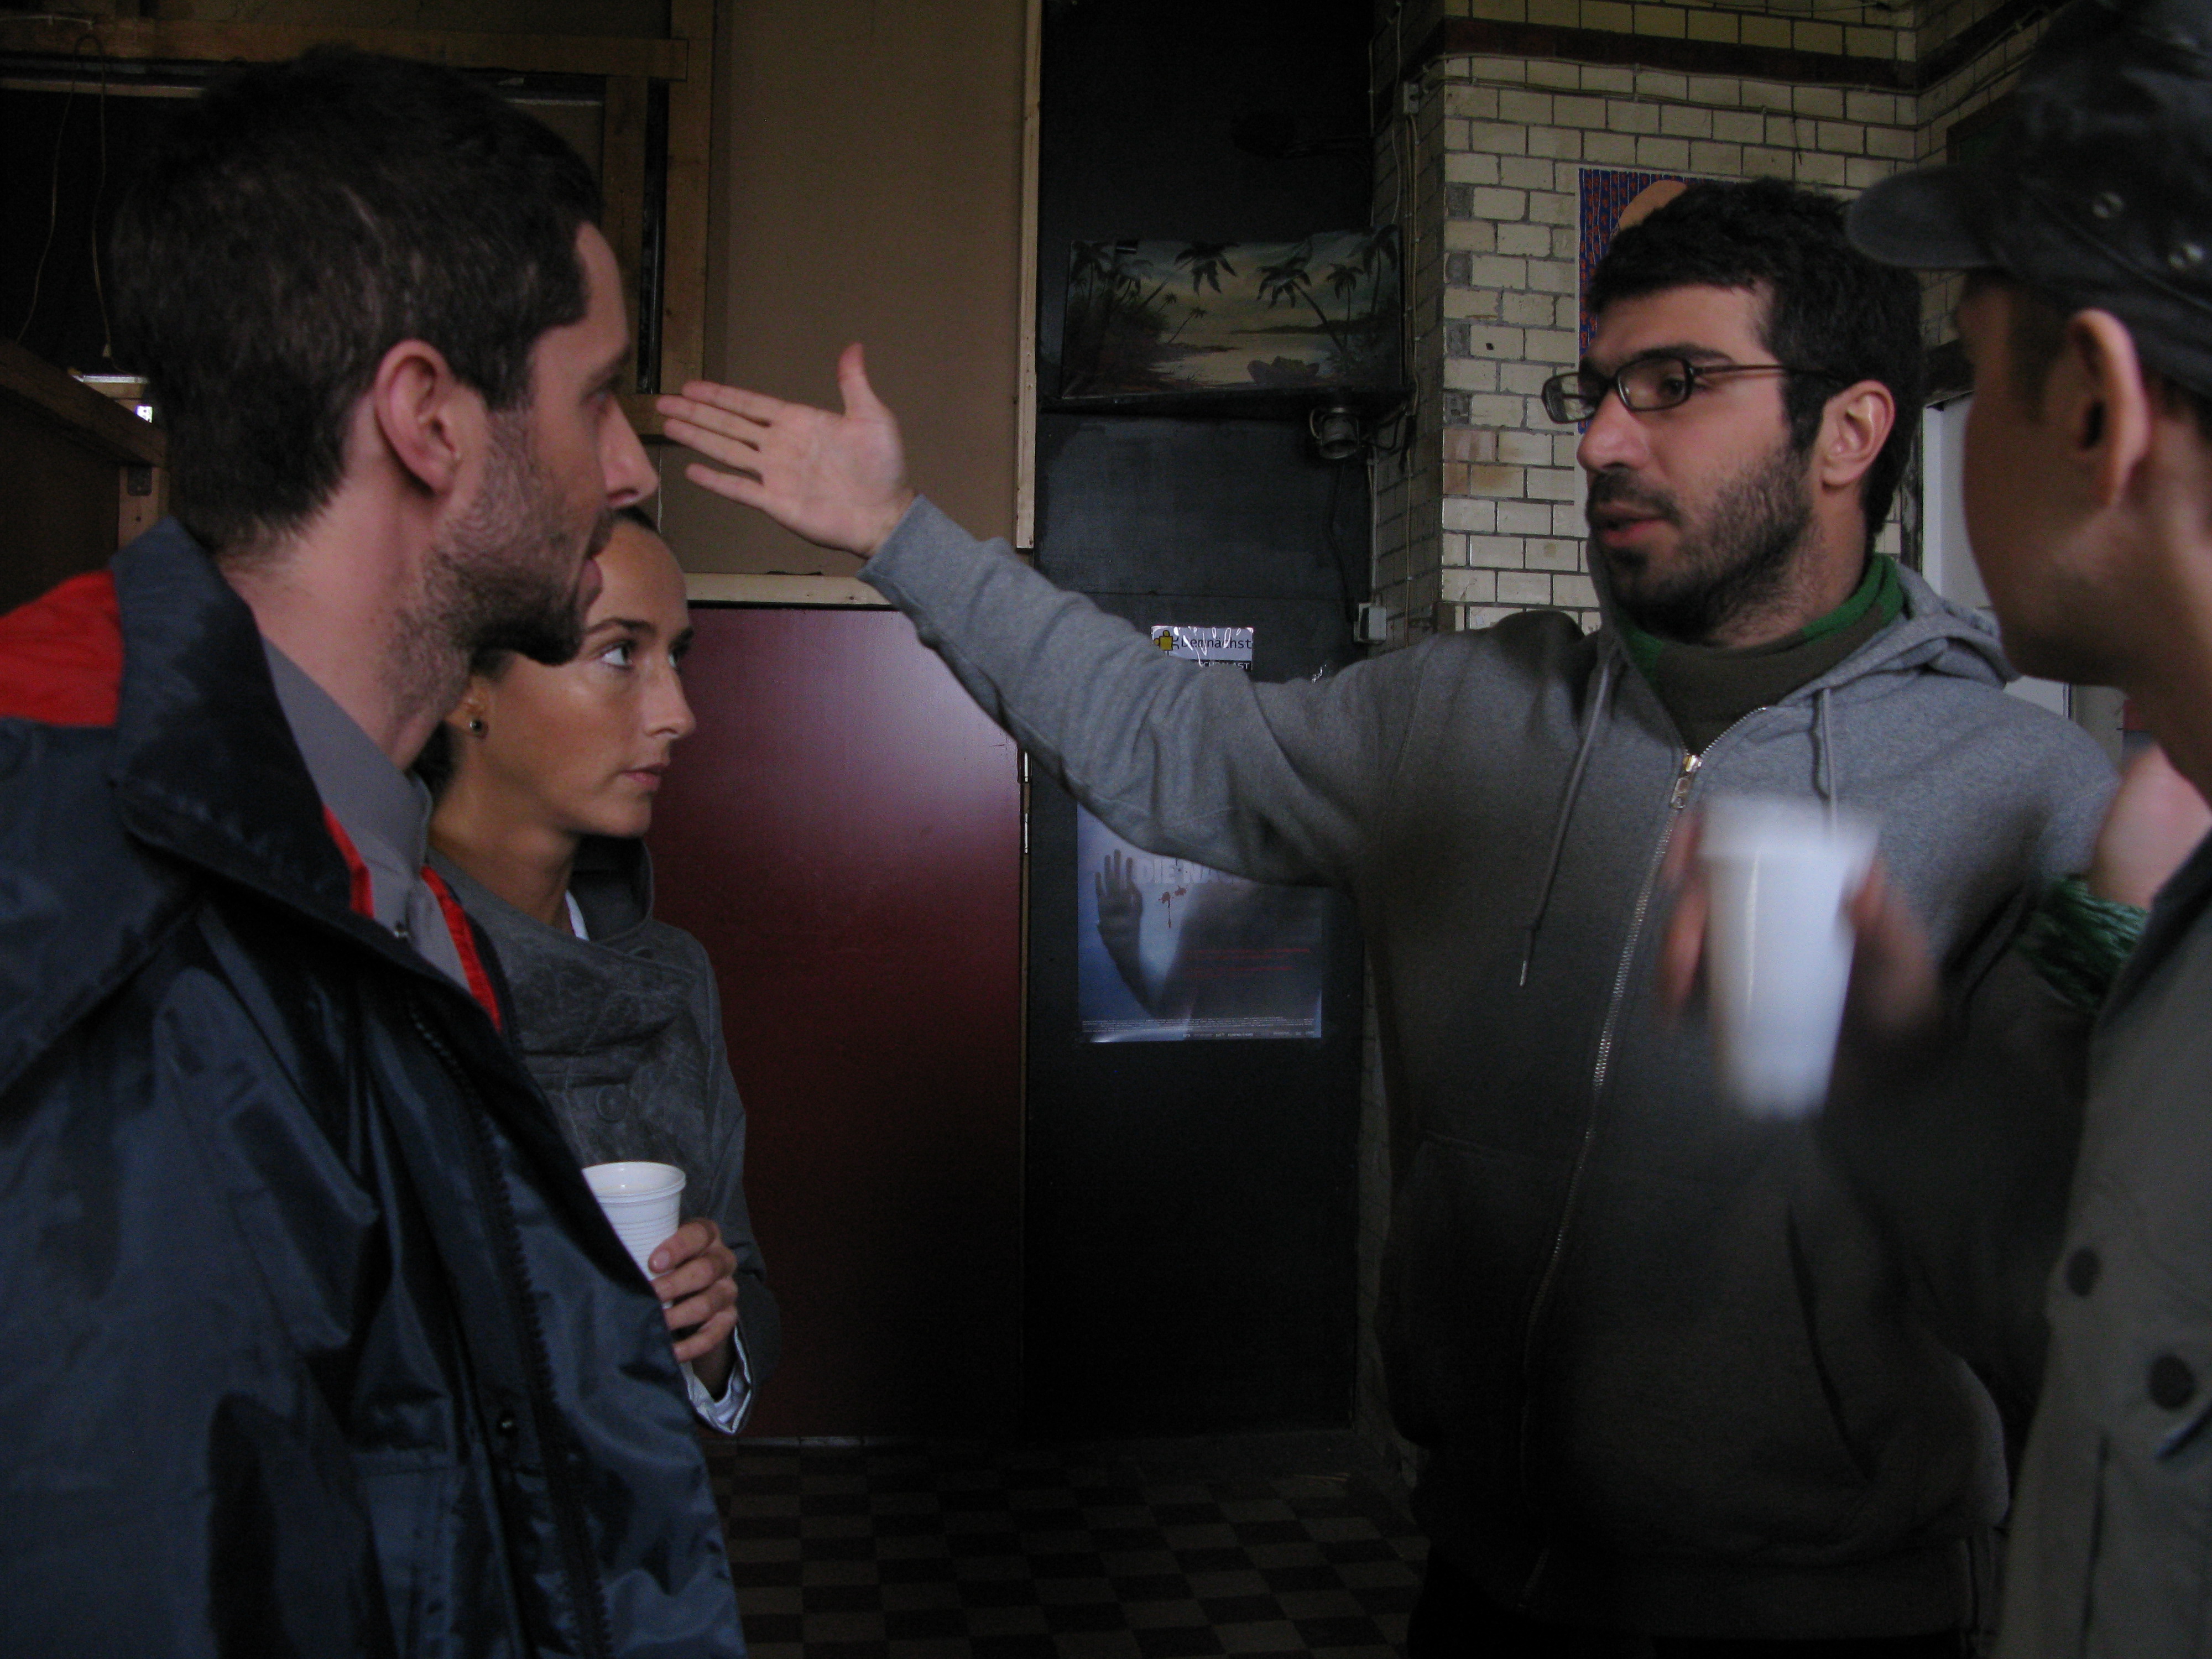 On the set of SIGHT (2009), with Director Amirali Navaee